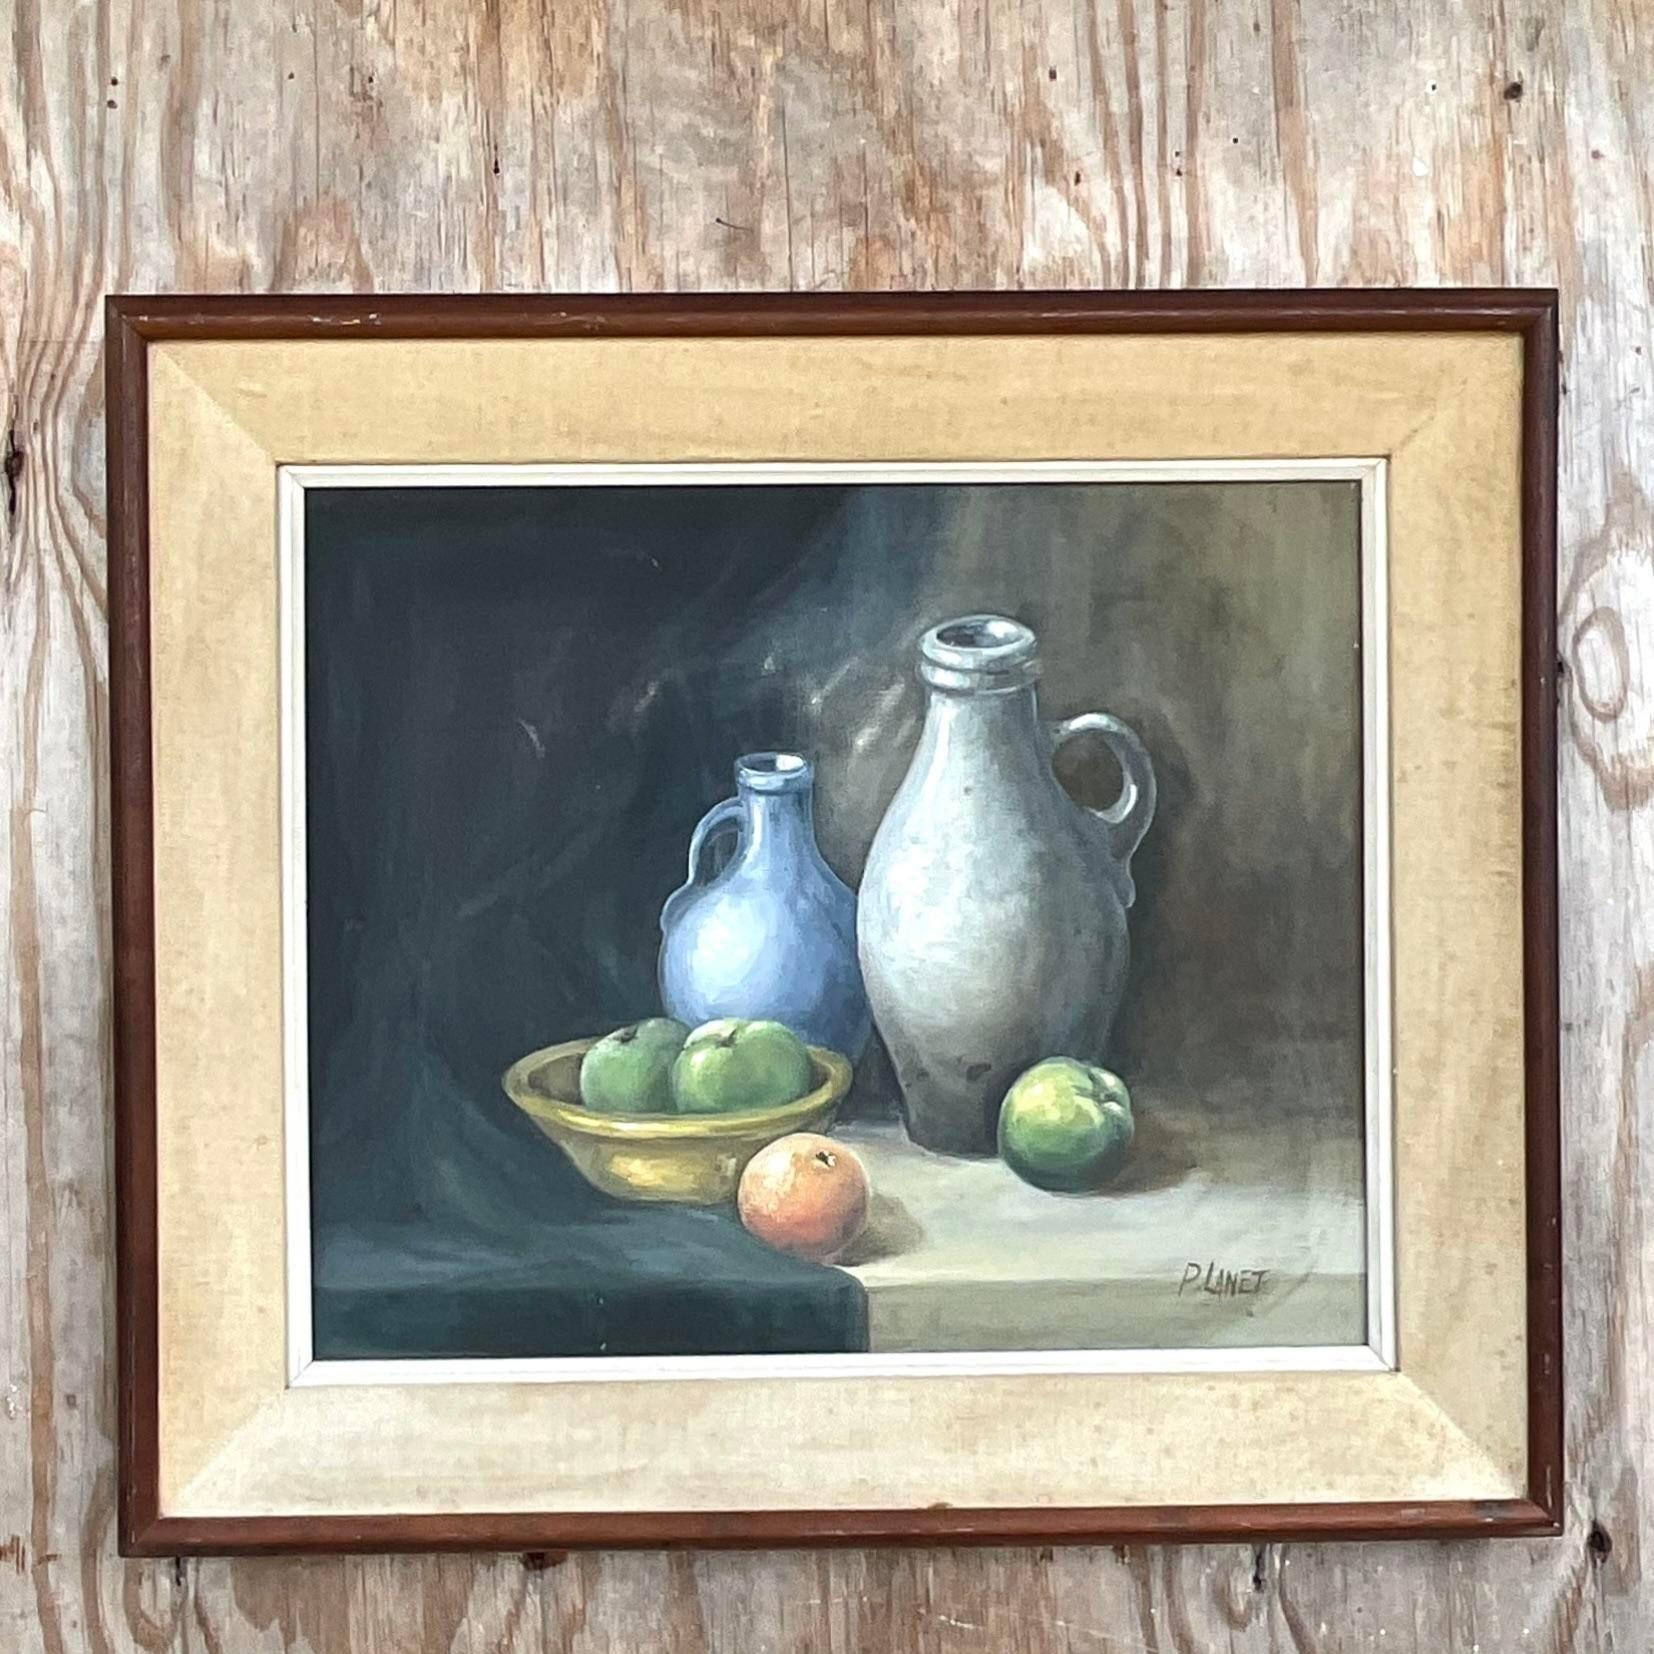 American Vintage Realist Tabletop Signed Original Oil Still Life Painting For Sale